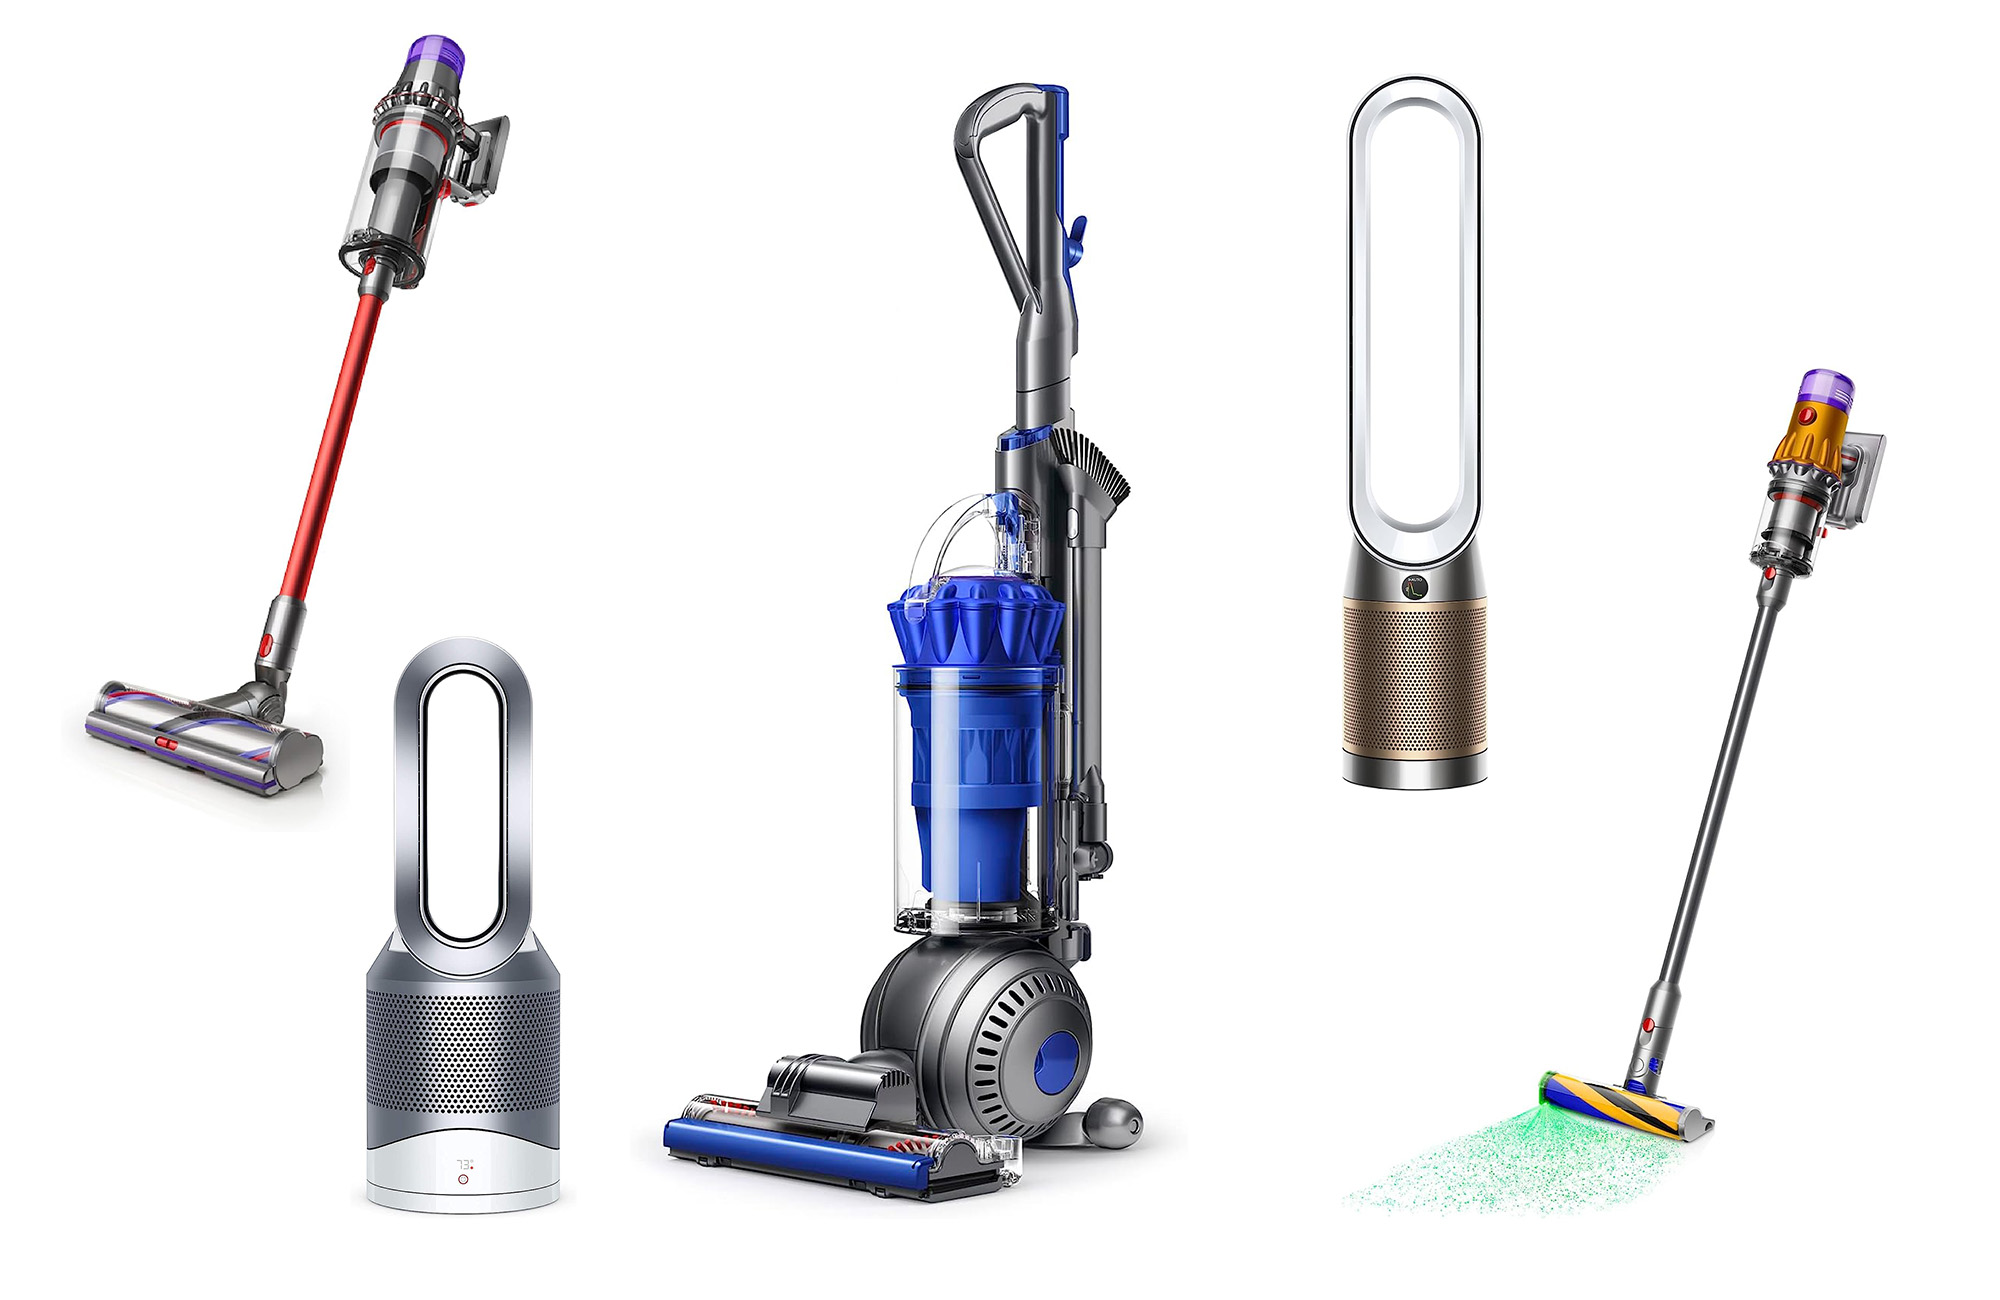 Clean up with these last-minute deals on vacuums from Dyson, Shark, Bissell, Black+Decker, Robovac, & more this Prime Day